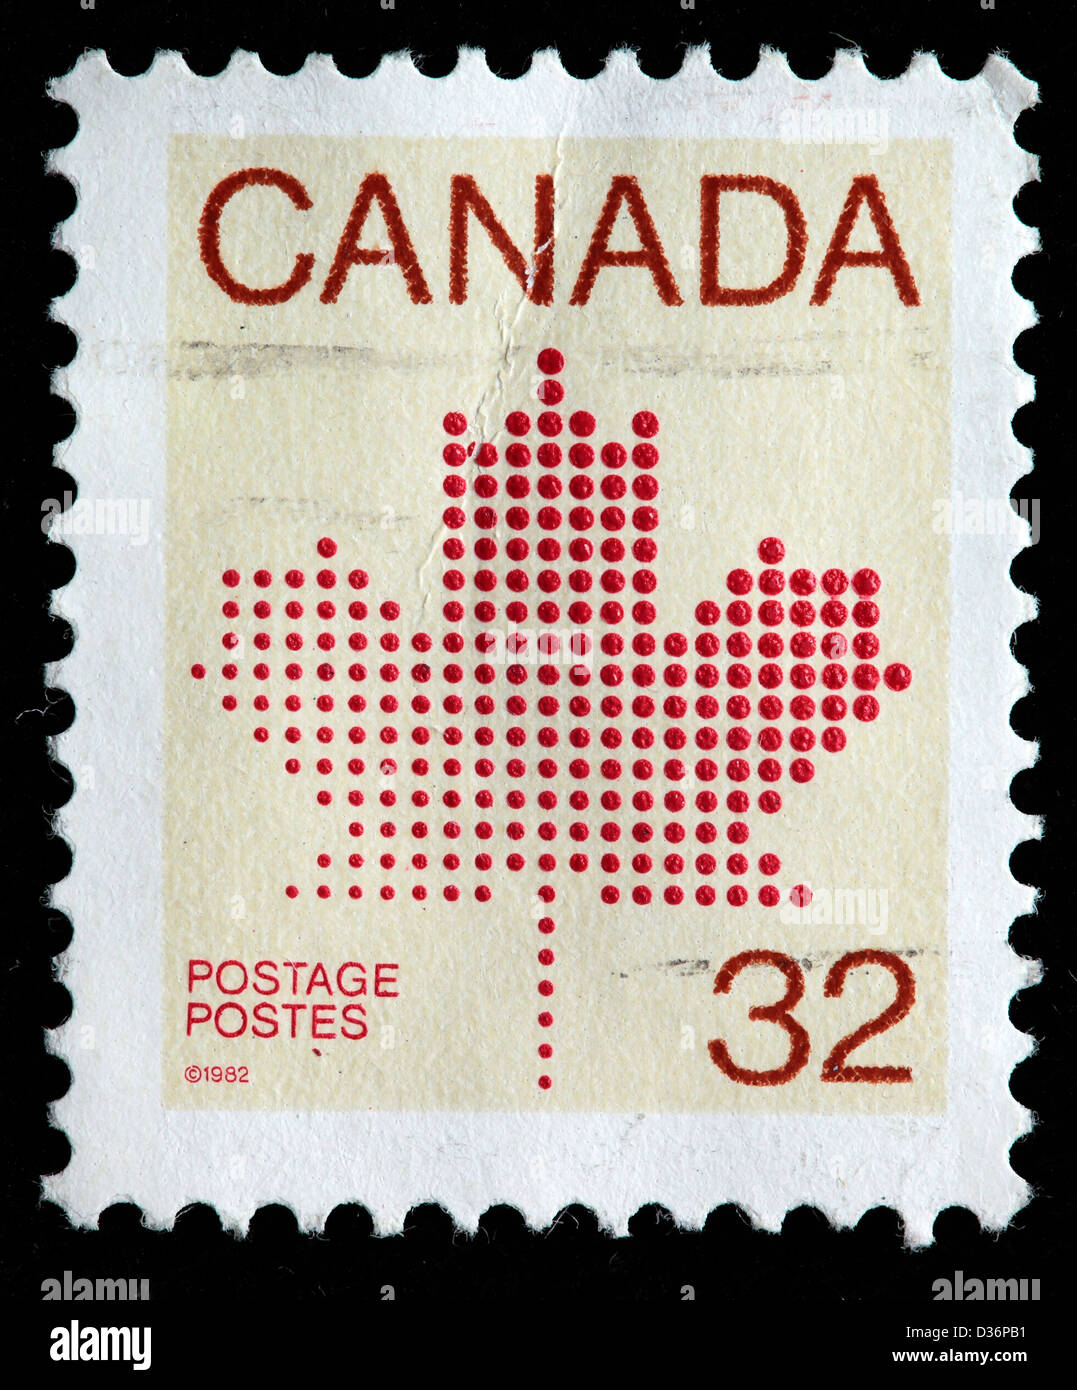 Maple leaf, postage stamp, Canada, 1982 Stock Photo